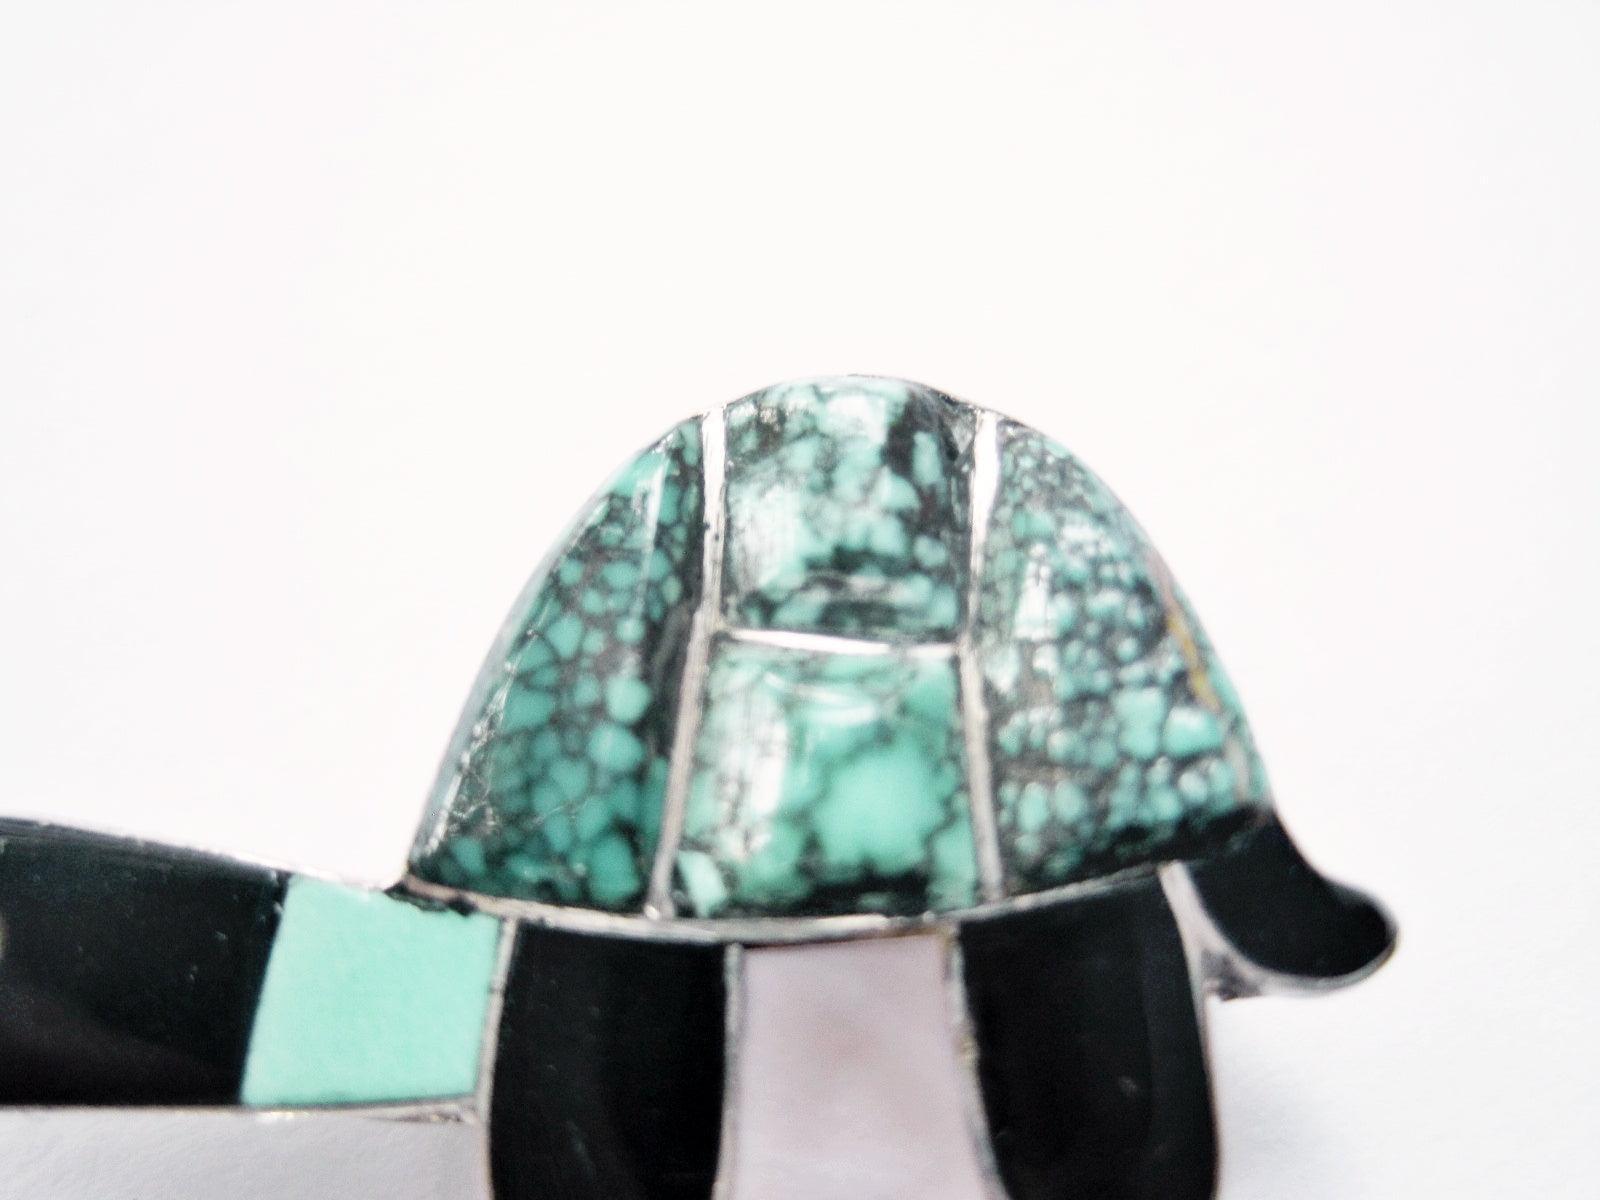 Vintage Zuni Silver and Turquoise Inlay Turtle Brooch - Anteeka